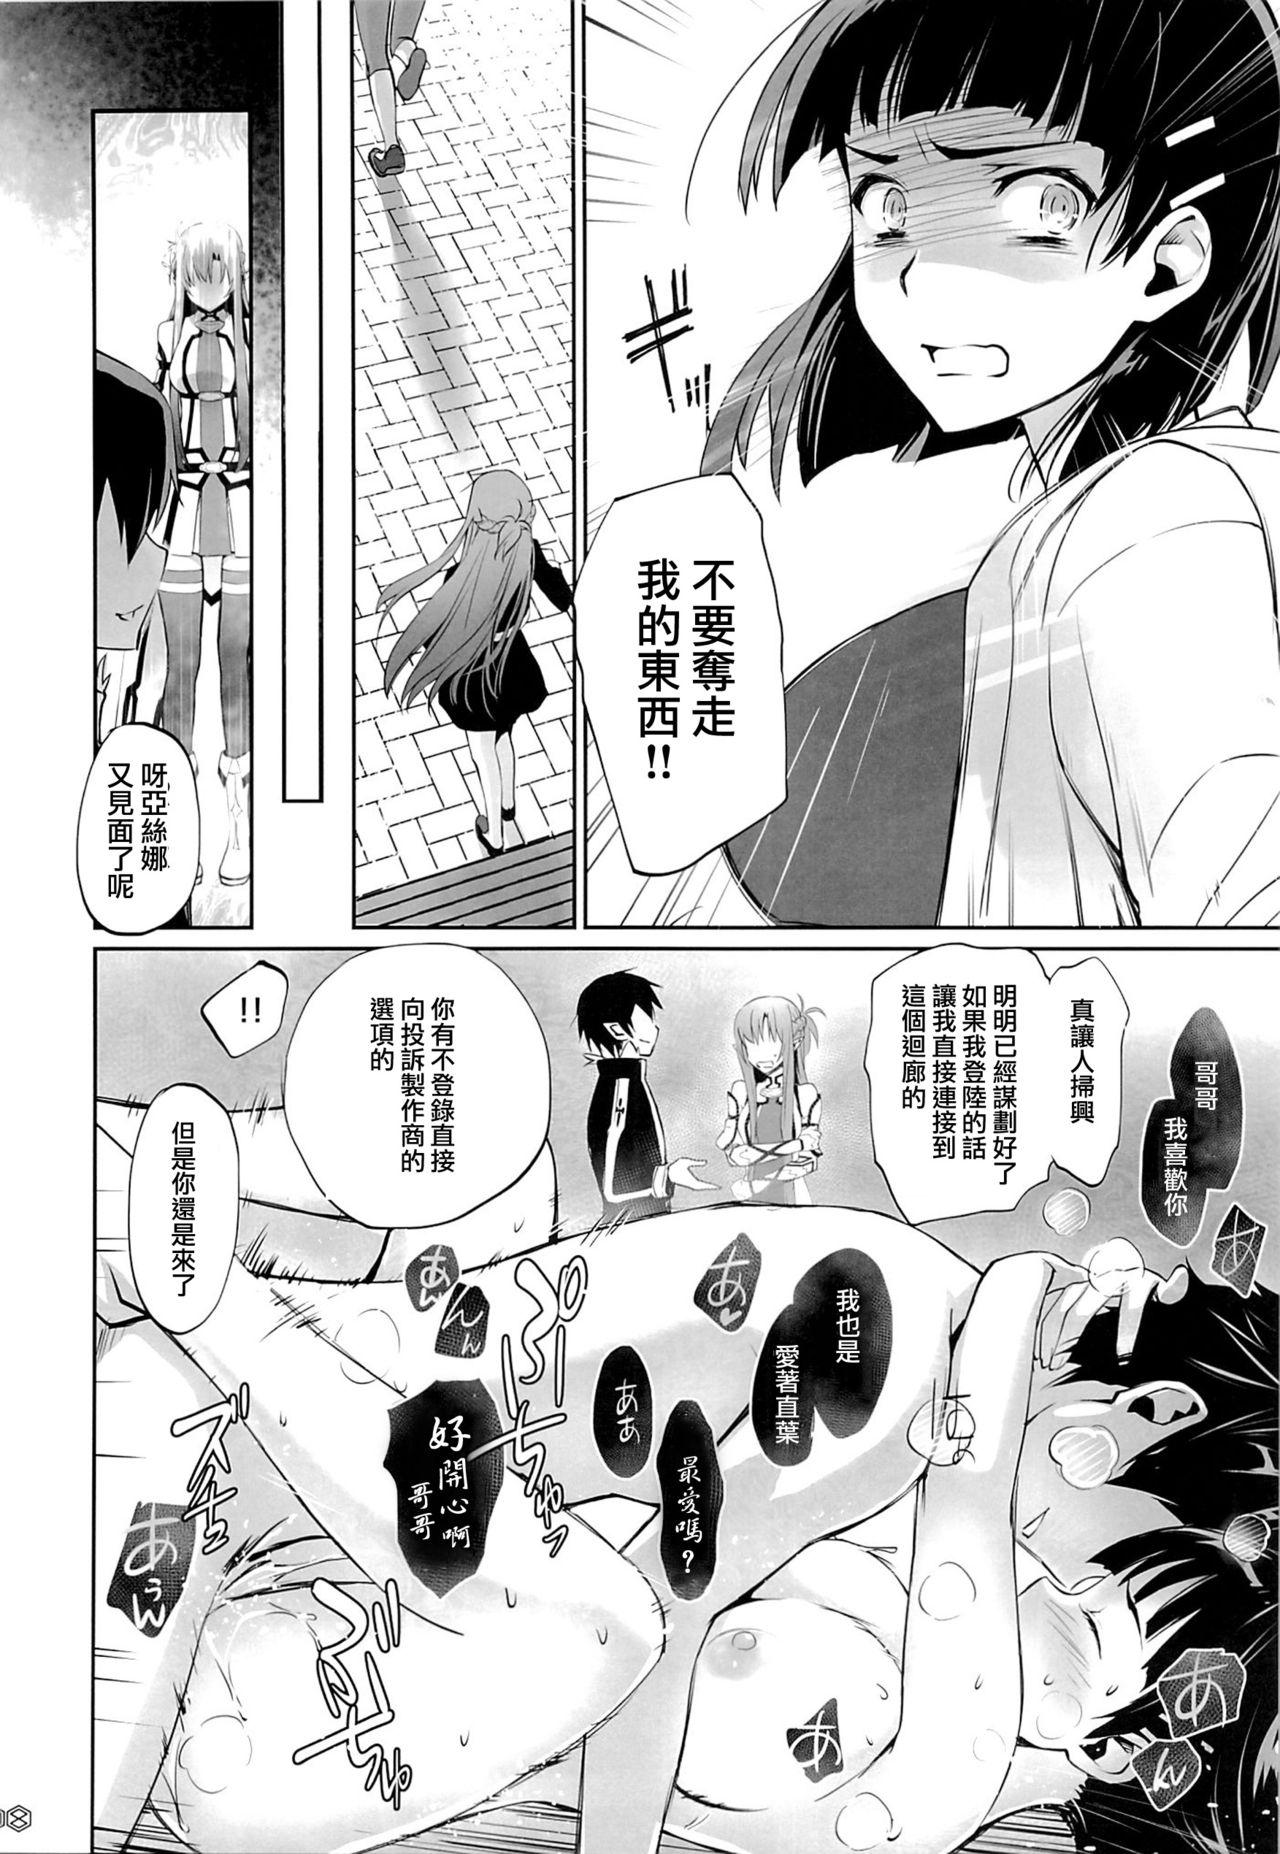 Chileno turnover - Sword art online College - Page 7